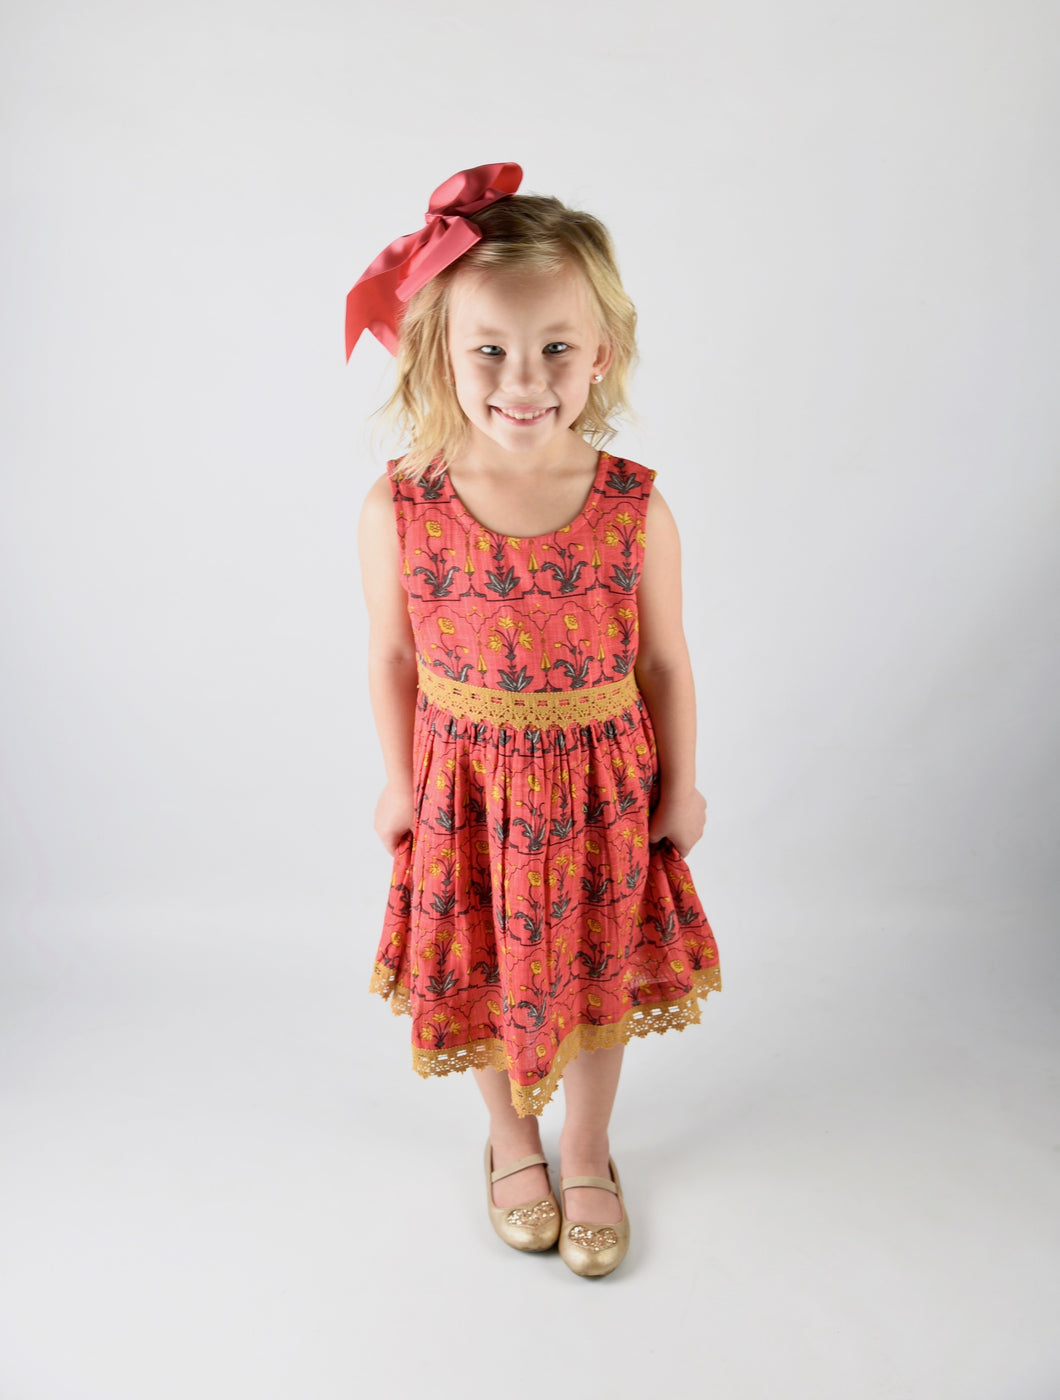 Peach and Yellow Print and Lace Detail Dress - Kids Wholesale Boutique Clothing, Dress - Girls Dresses, Yo Baby Wholesale - Yo Baby